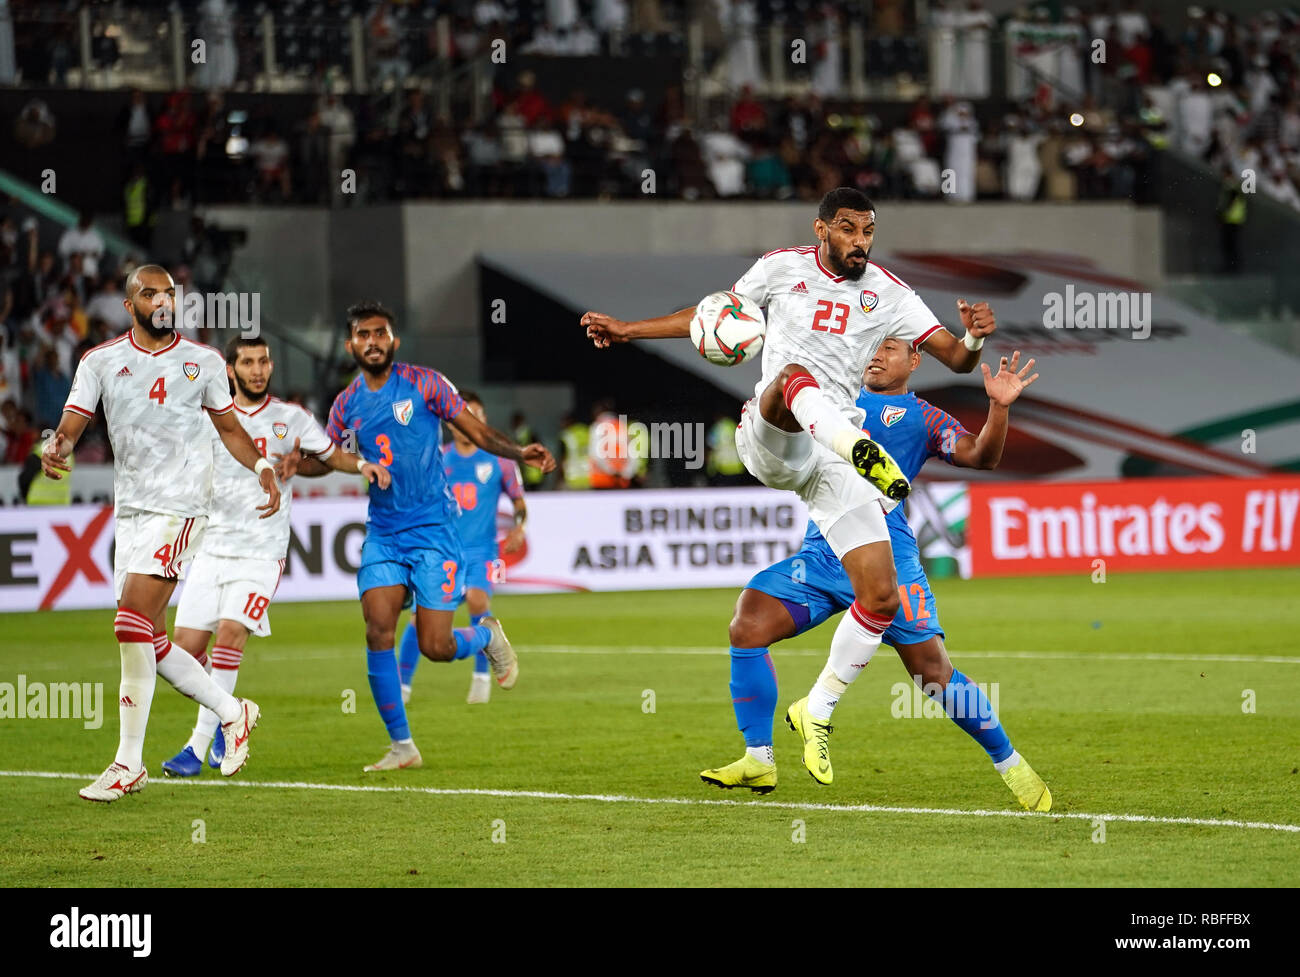 January 10, 2019 : Mohamed Ahmed of United Arab Emiratesclose to scoring an own goal during UAE v India at the Zayed Sports City Stadium in Abu Dhabi, UAE, AFC Asian Cup, Asian Football championship. Ulrik Pedersen/CSM. Stock Photo